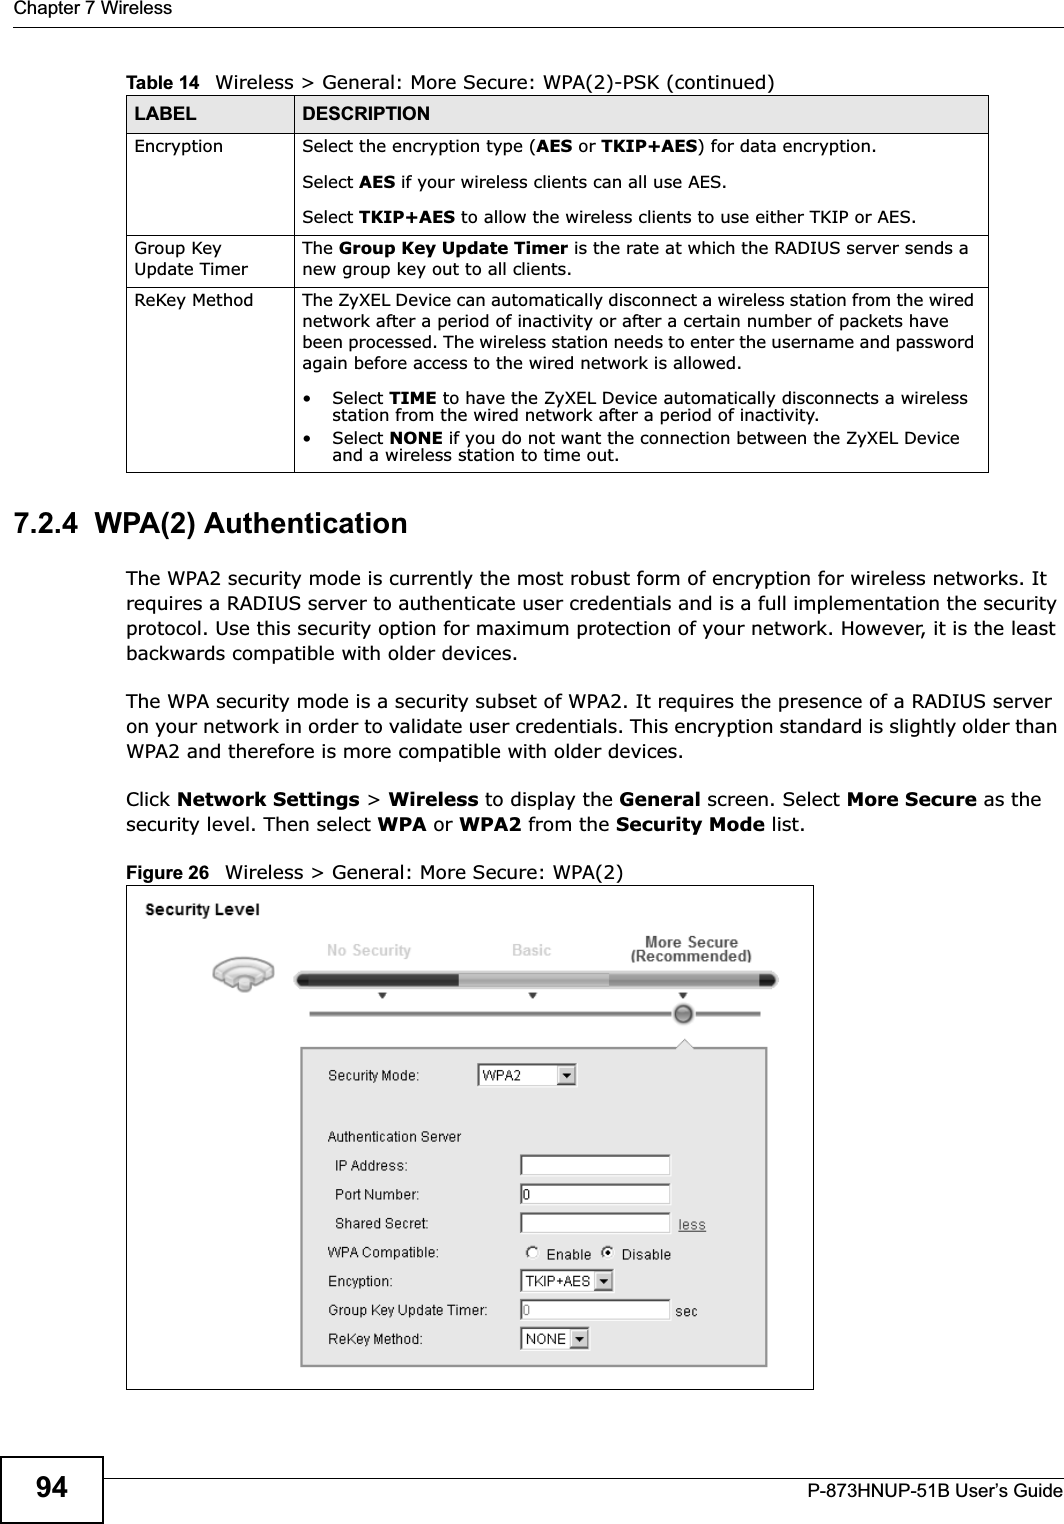 Chapter 7 WirelessP-873HNUP-51B User’s Guide947.2.4  WPA(2) AuthenticationThe WPA2 security mode is currently the most robust form of encryption for wireless networks. It requires a RADIUS server to authenticate user credentials and is a full implementation the security protocol. Use this security option for maximum protection of your network. However, it is the least backwards compatible with older devices.The WPA security mode is a security subset of WPA2. It requires the presence of a RADIUS server on your network in order to validate user credentials. This encryption standard is slightly older than WPA2 and therefore is more compatible with older devices.Click Network Settings &gt; Wireless to display the General screen. Select More Secure as the security level. Then select WPA or WPA2 from the Security Mode list.Figure 26   Wireless &gt; General: More Secure: WPA(2)Encryption Select the encryption type (AES or TKIP+AES) for data encryption.Select AES if your wireless clients can all use AES.Select TKIP+AES to allow the wireless clients to use either TKIP or AES.Group Key Update TimerThe Group Key Update Timer is the rate at which the RADIUS server sends a new group key out to all clients.  ReKey Method The ZyXEL Device can automatically disconnect a wireless station from the wired network after a period of inactivity or after a certain number of packets have been processed. The wireless station needs to enter the username and password again before access to the wired network is allowed. • Select TIME to have the ZyXEL Device automatically disconnects a wireless station from the wired network after a period of inactivity.• Select NONE if you do not want the connection between the ZyXEL Device and a wireless station to time out.Table 14   Wireless &gt; General: More Secure: WPA(2)-PSK (continued)LABEL DESCRIPTION